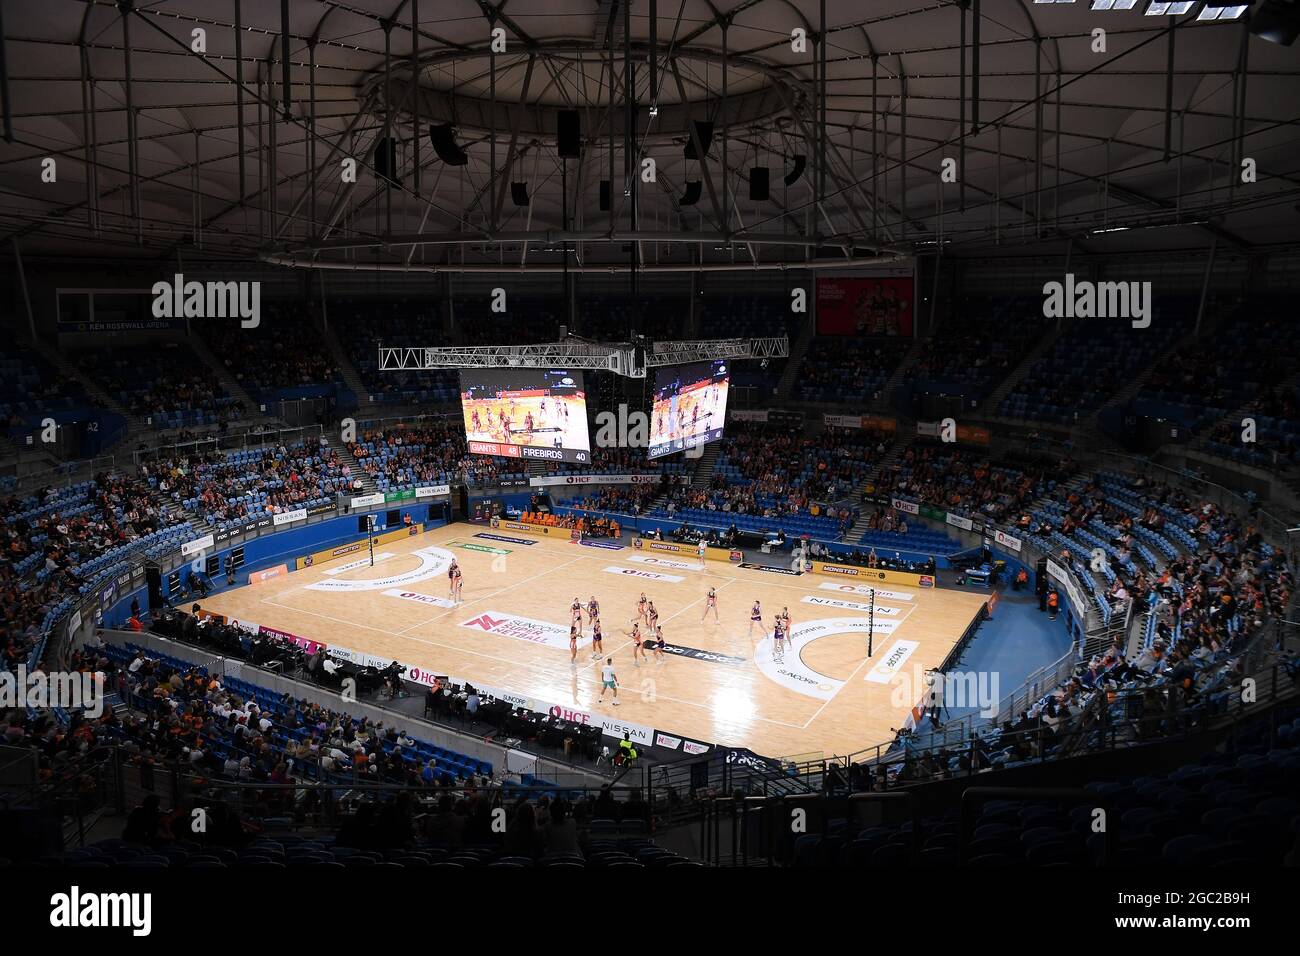 SYDNEY, AUSTRALIA - MAY 16: A general view during the Suncorp Super Netball round three match between Giants Netball and Queensland Firebirds on May 16, 2021 at Ken Rosewall Arena in Sydney, Australia.  Credit: Steven Markham/Speed Media/Alamy Live News Stock Photo